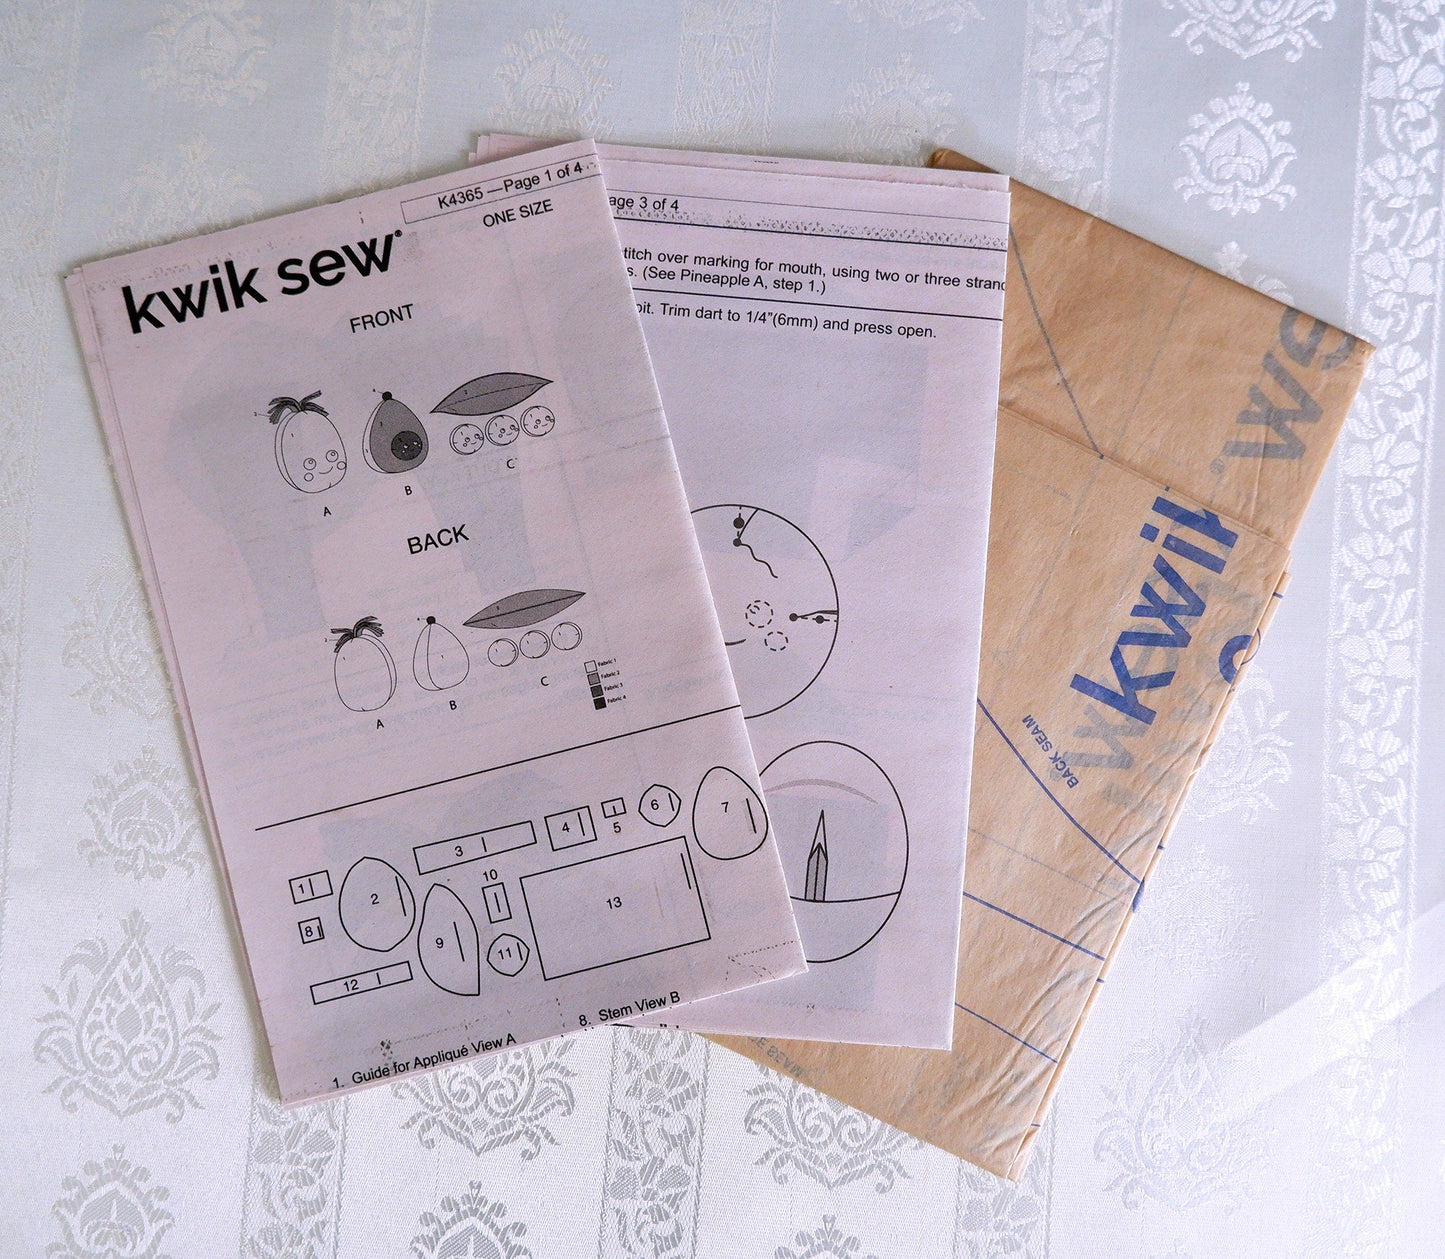 Kwik Sew K4365, plush pattern of fruits and vegetables